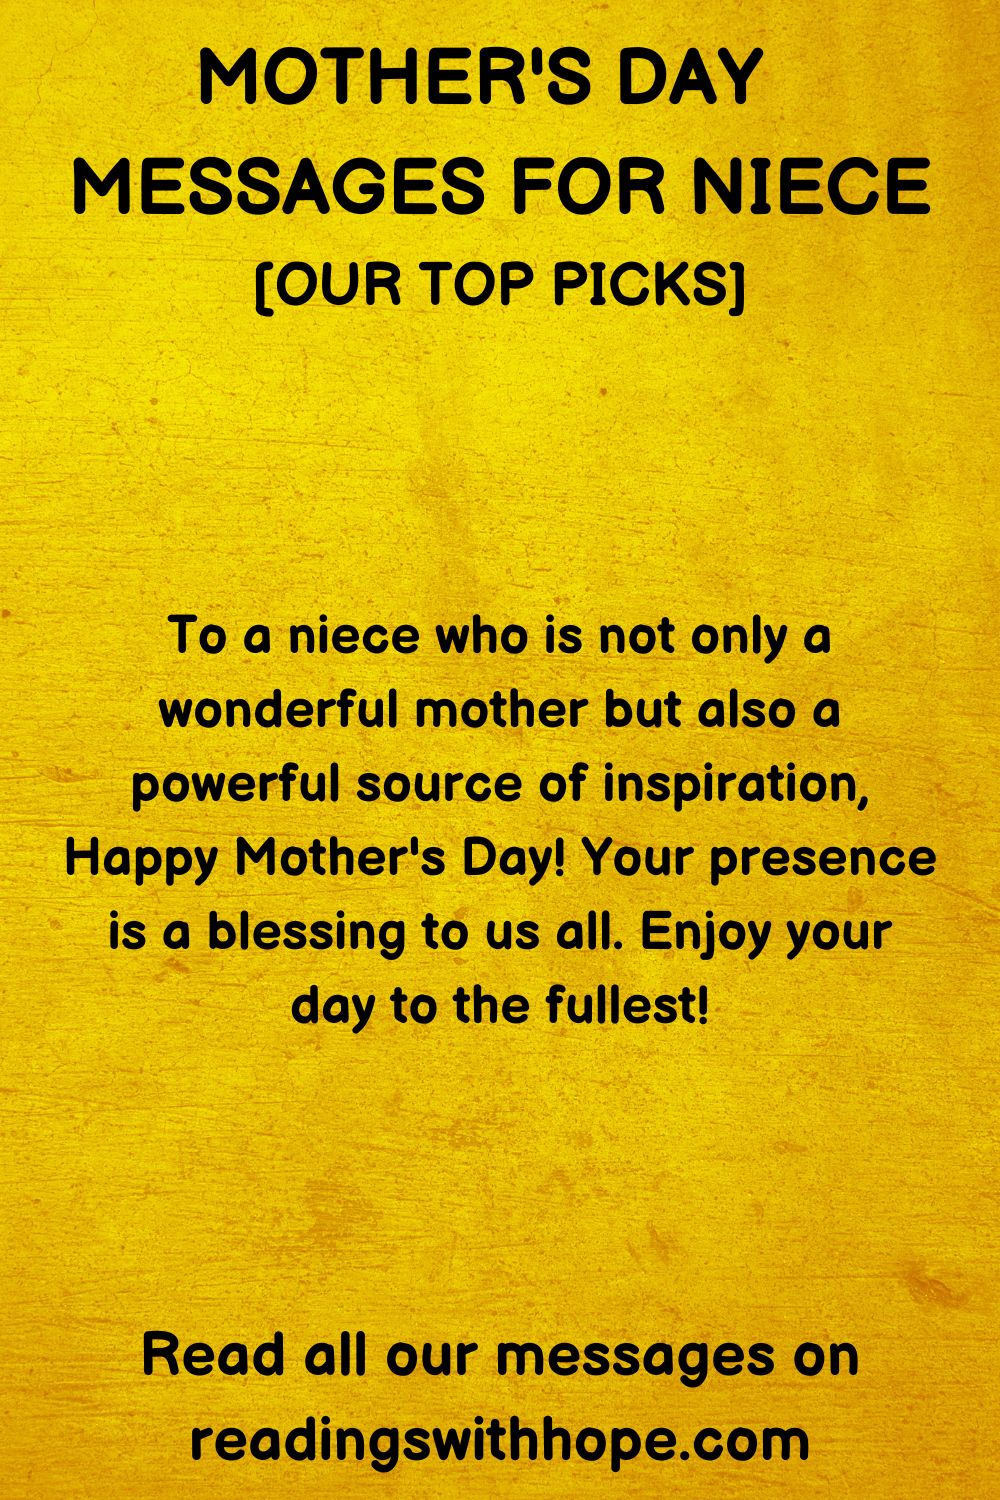 50 Mother's Day Messages for Niece